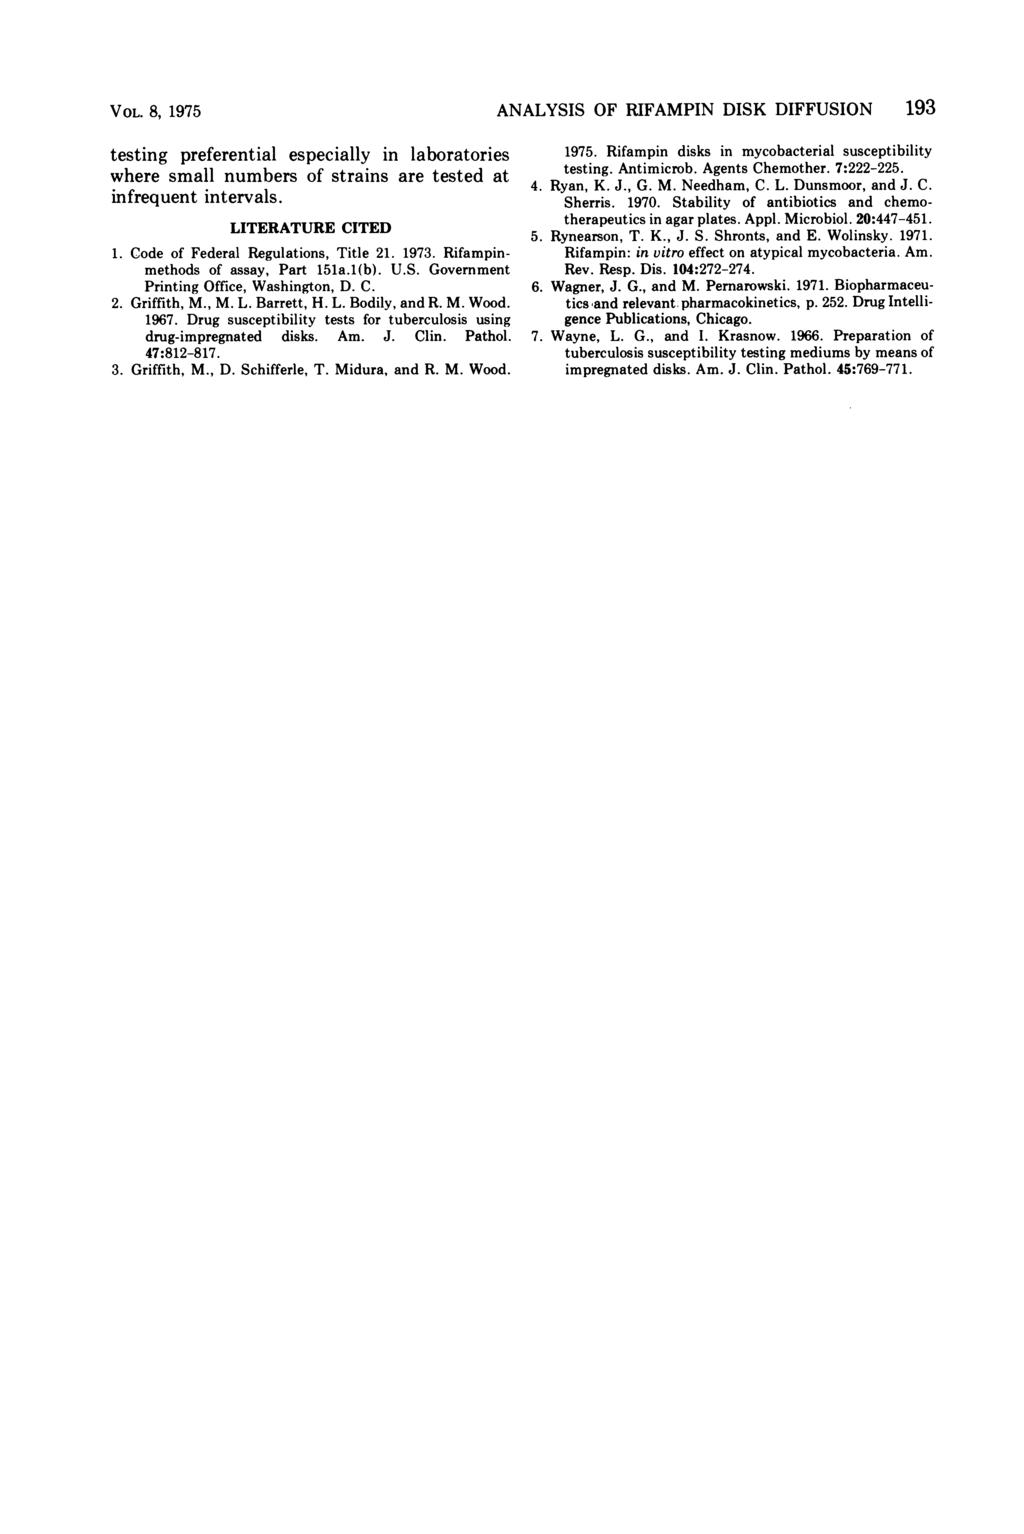 VOL. 8, 1975 ANALYSIS OF RIFAMPIN DISK DIFFUSION 193 testing preferential especially in laboratories where small numbers of strains are tested at infrequent intervals. LITERATURE CITED 1.